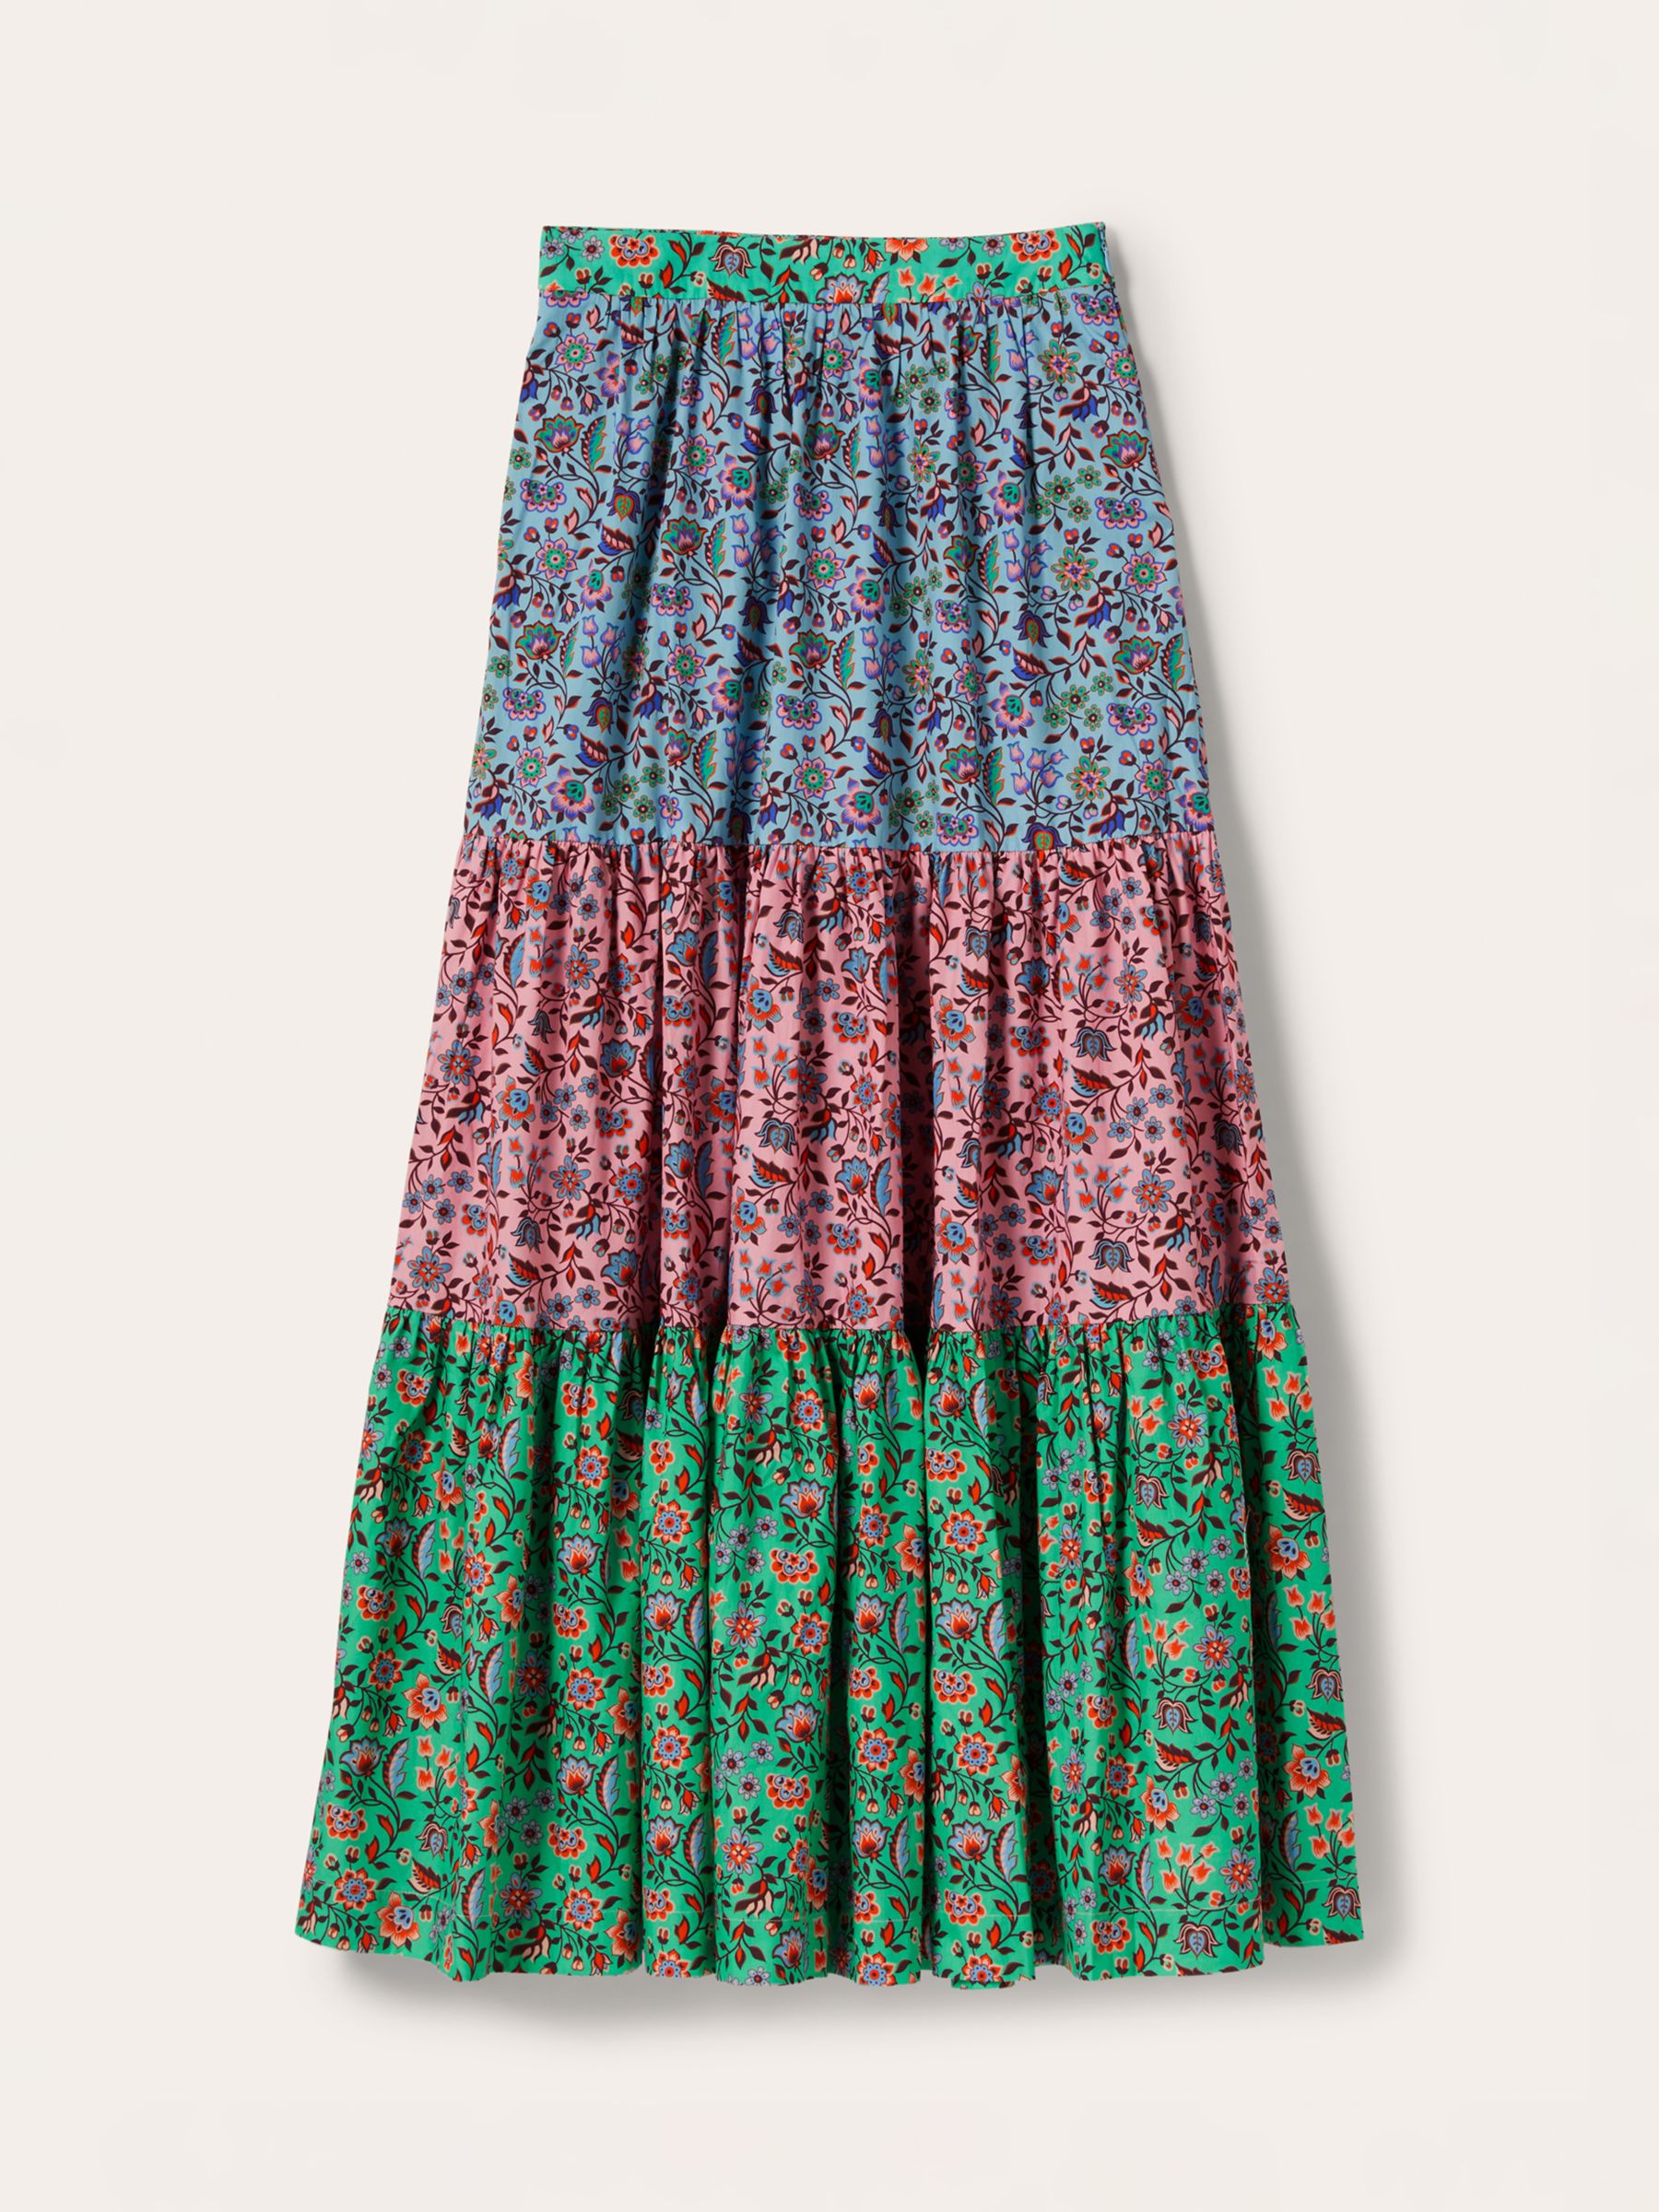 Boden Lorna Floral Print Tiered Maxi Skirt, Formica Pink at John Lewis ...